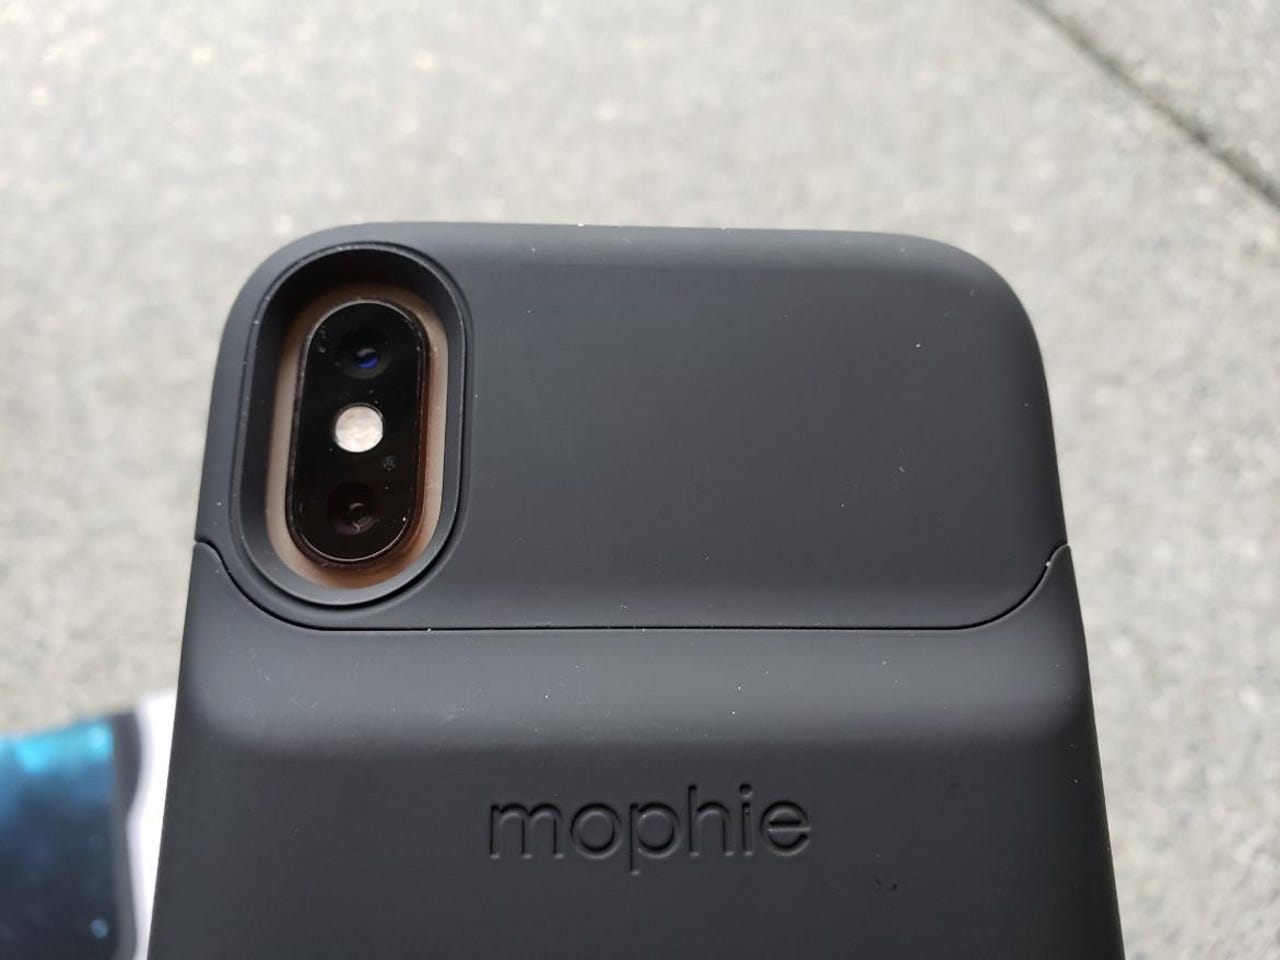 mophie-juice-pack-access-iphone-xs-5.jpg